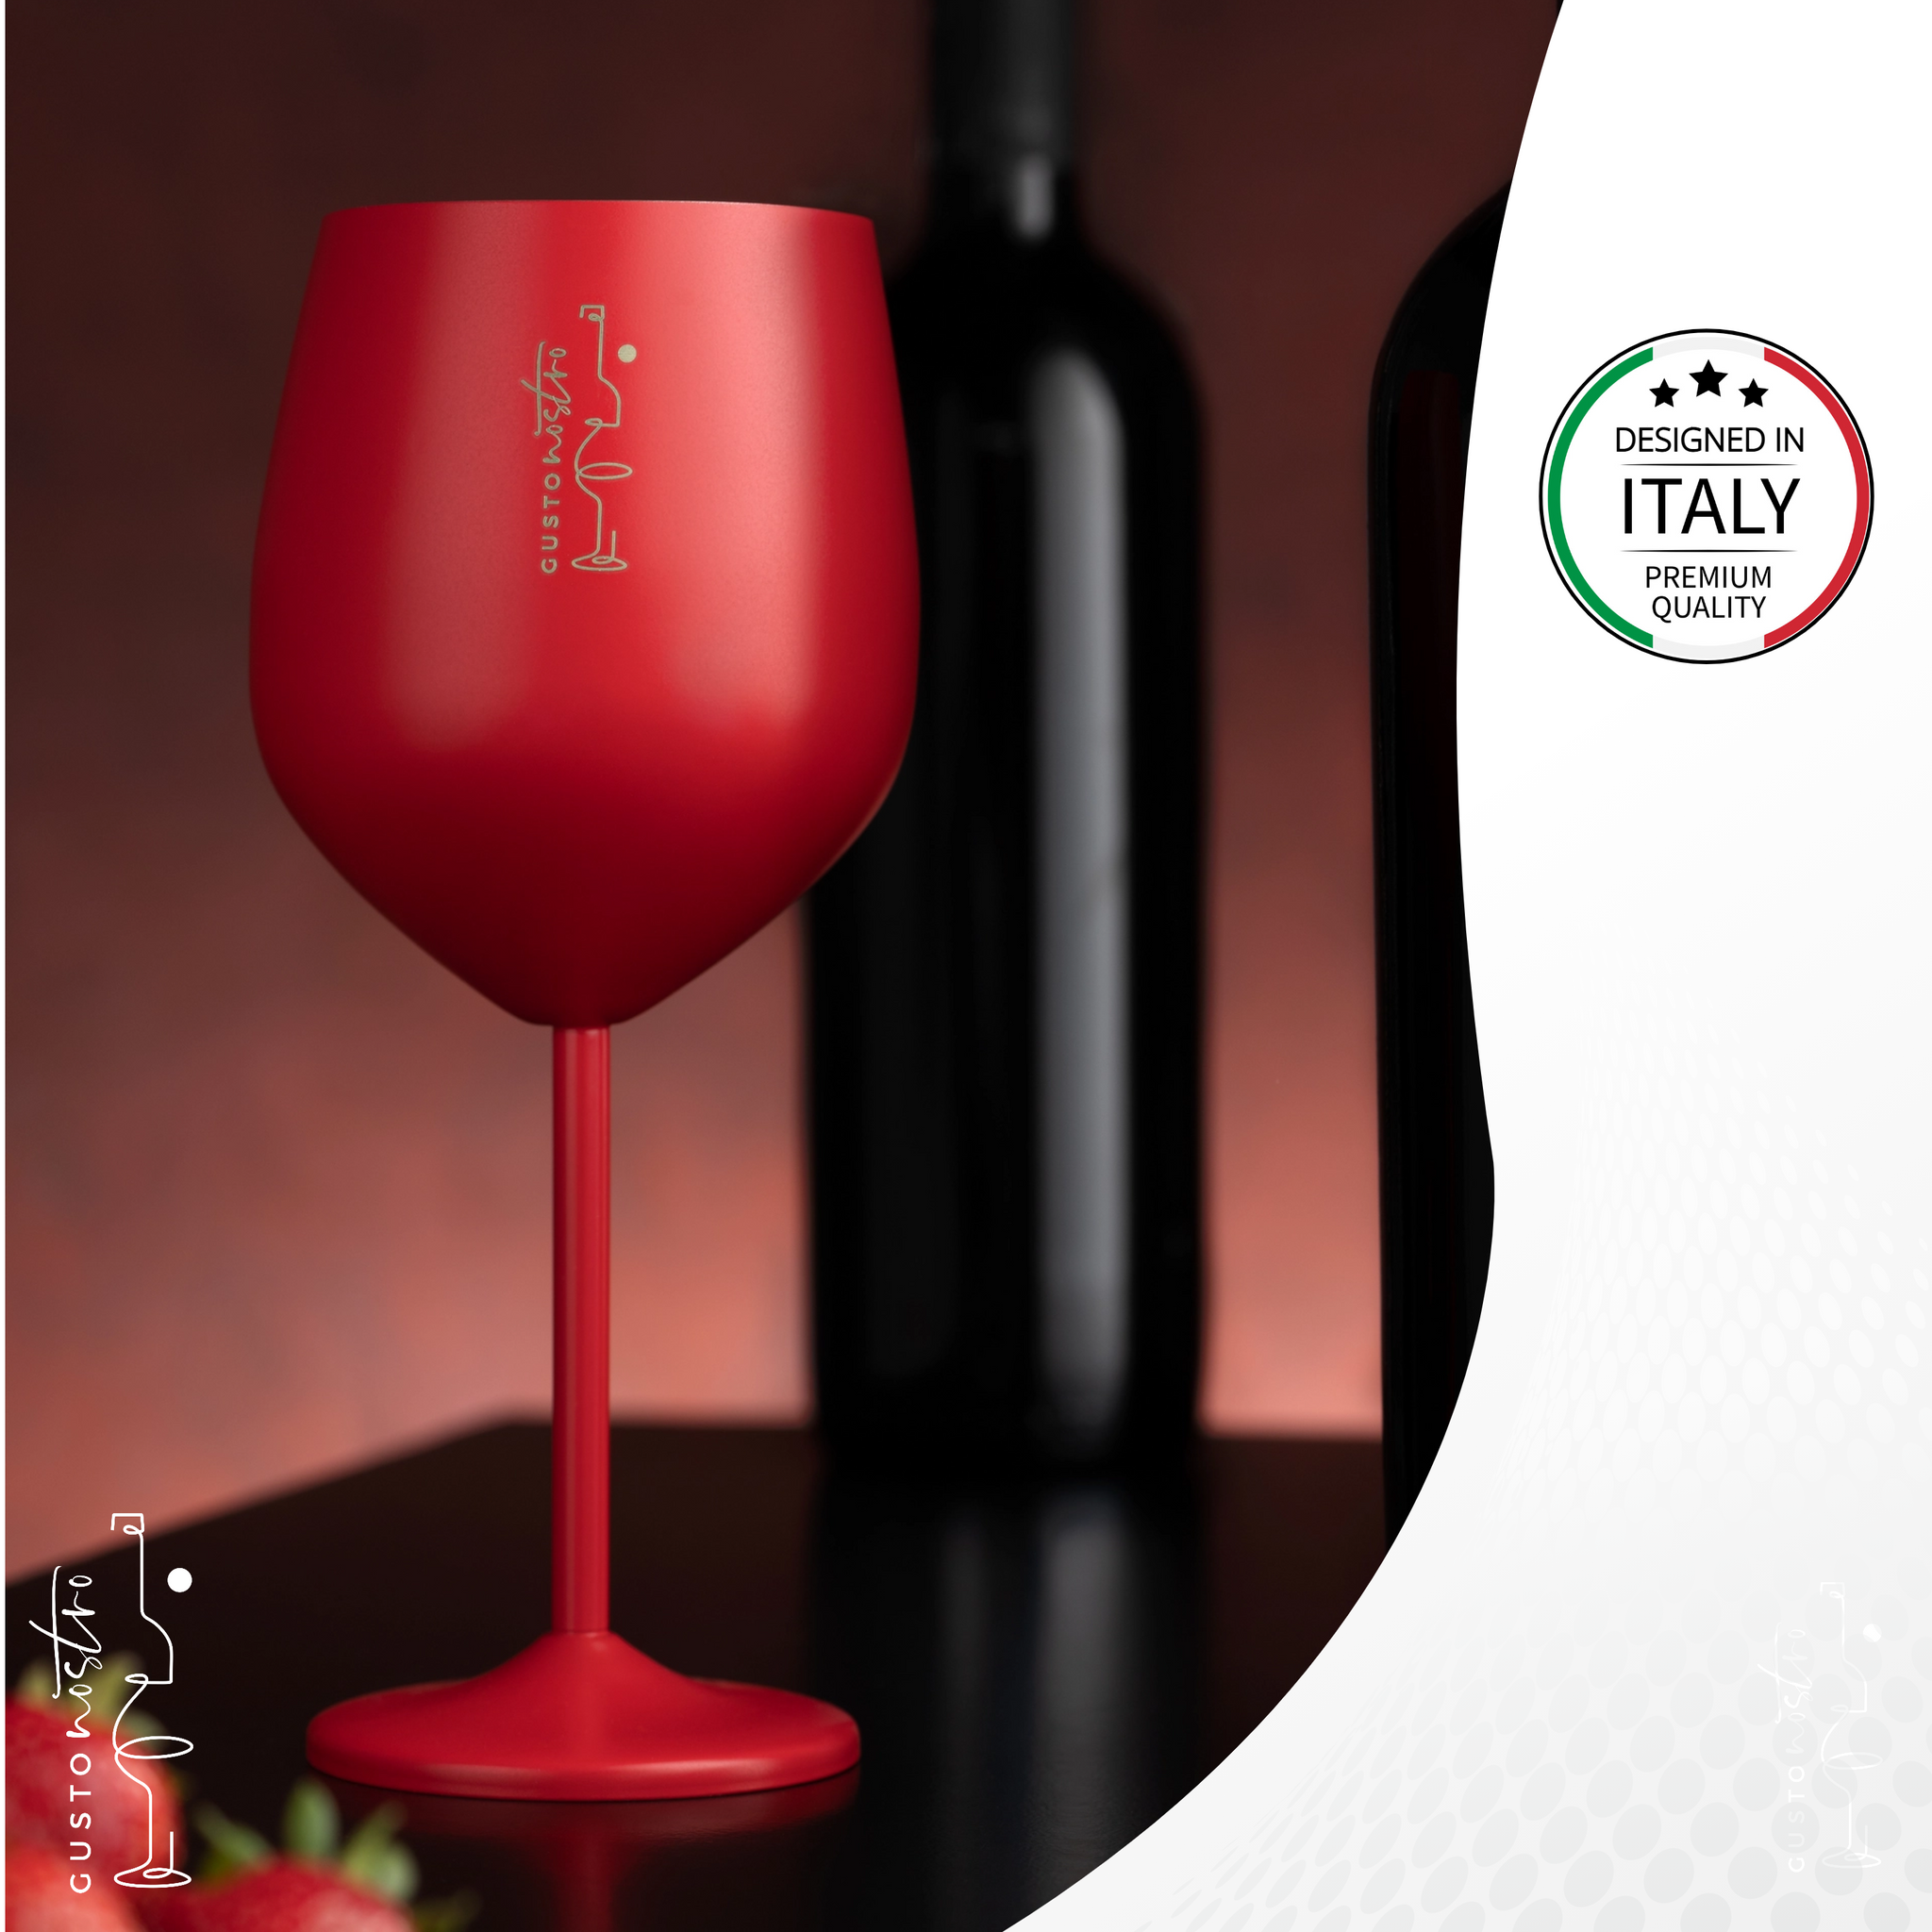 Gusto Nostro Stainless Steel Wine Glass - 18 oz - Unbreakable Rose Gol